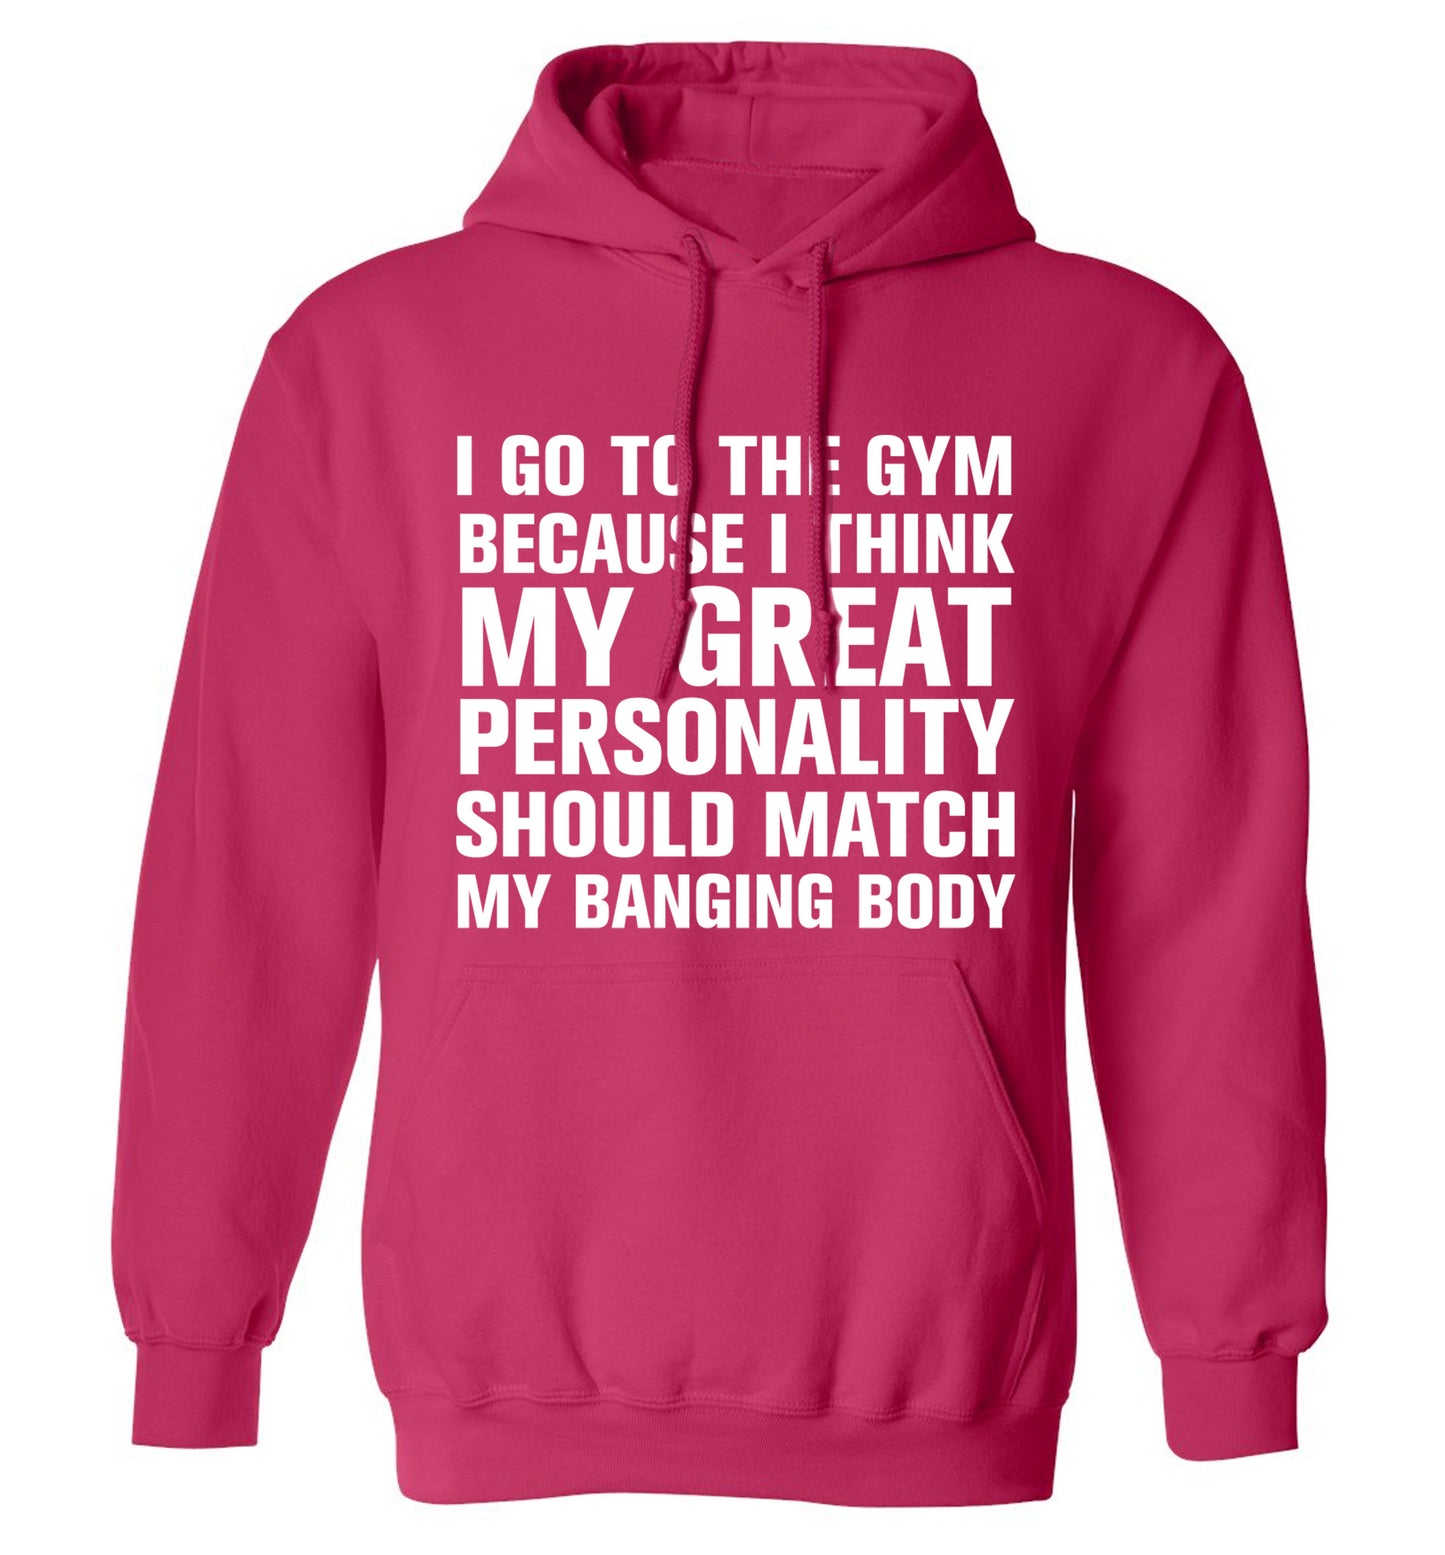 I go to the gym because I think my great personality should match my banging body adults unisex pink hoodie 2XL